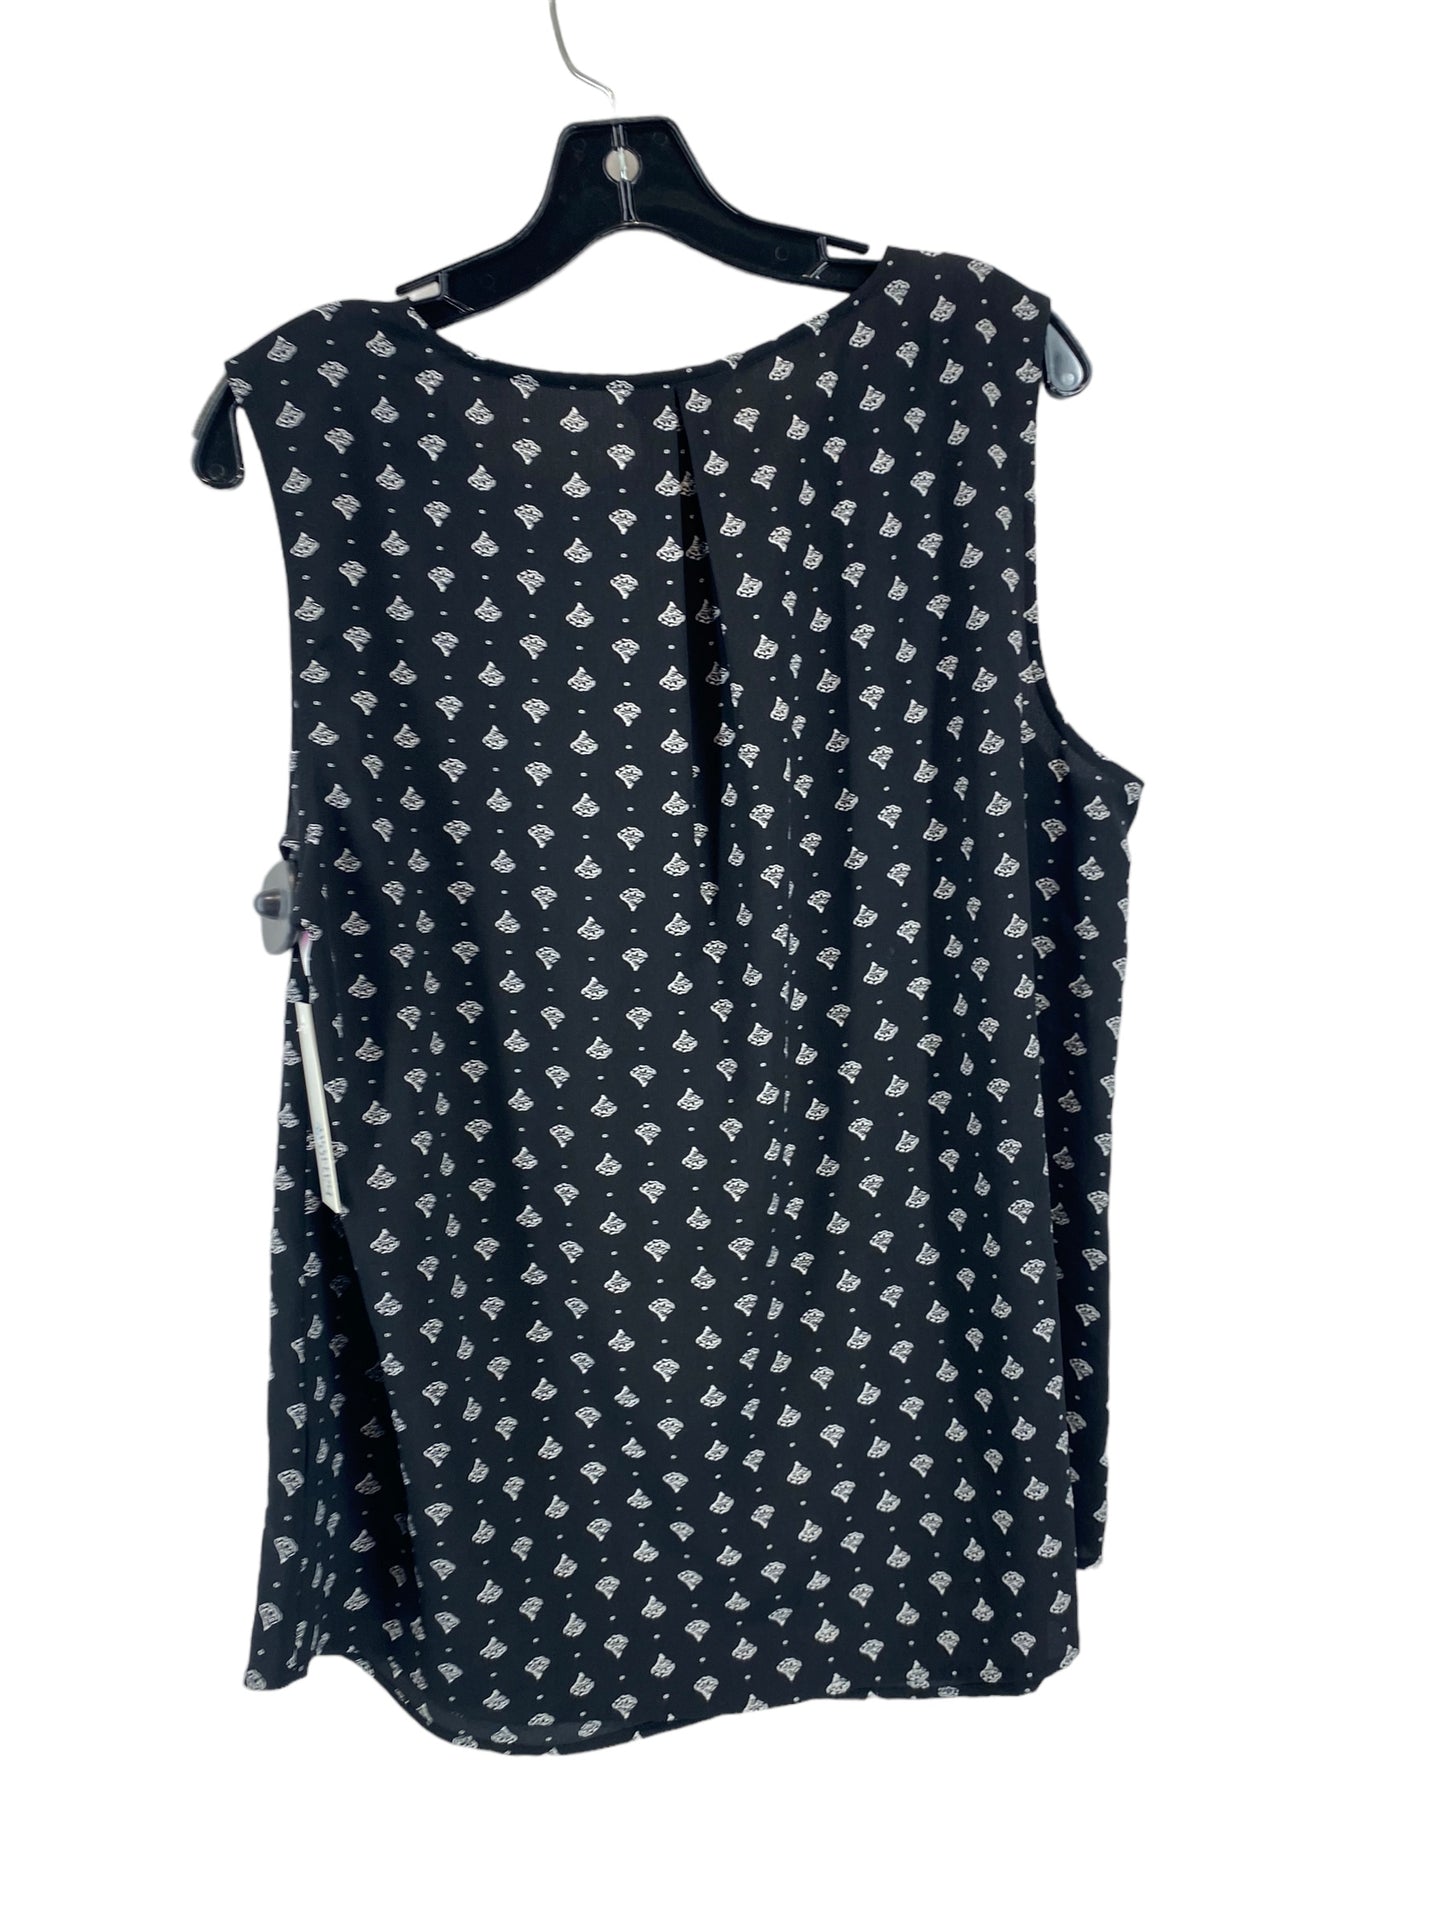 Top Sleeveless By Croft And Barrow  Size: Xl